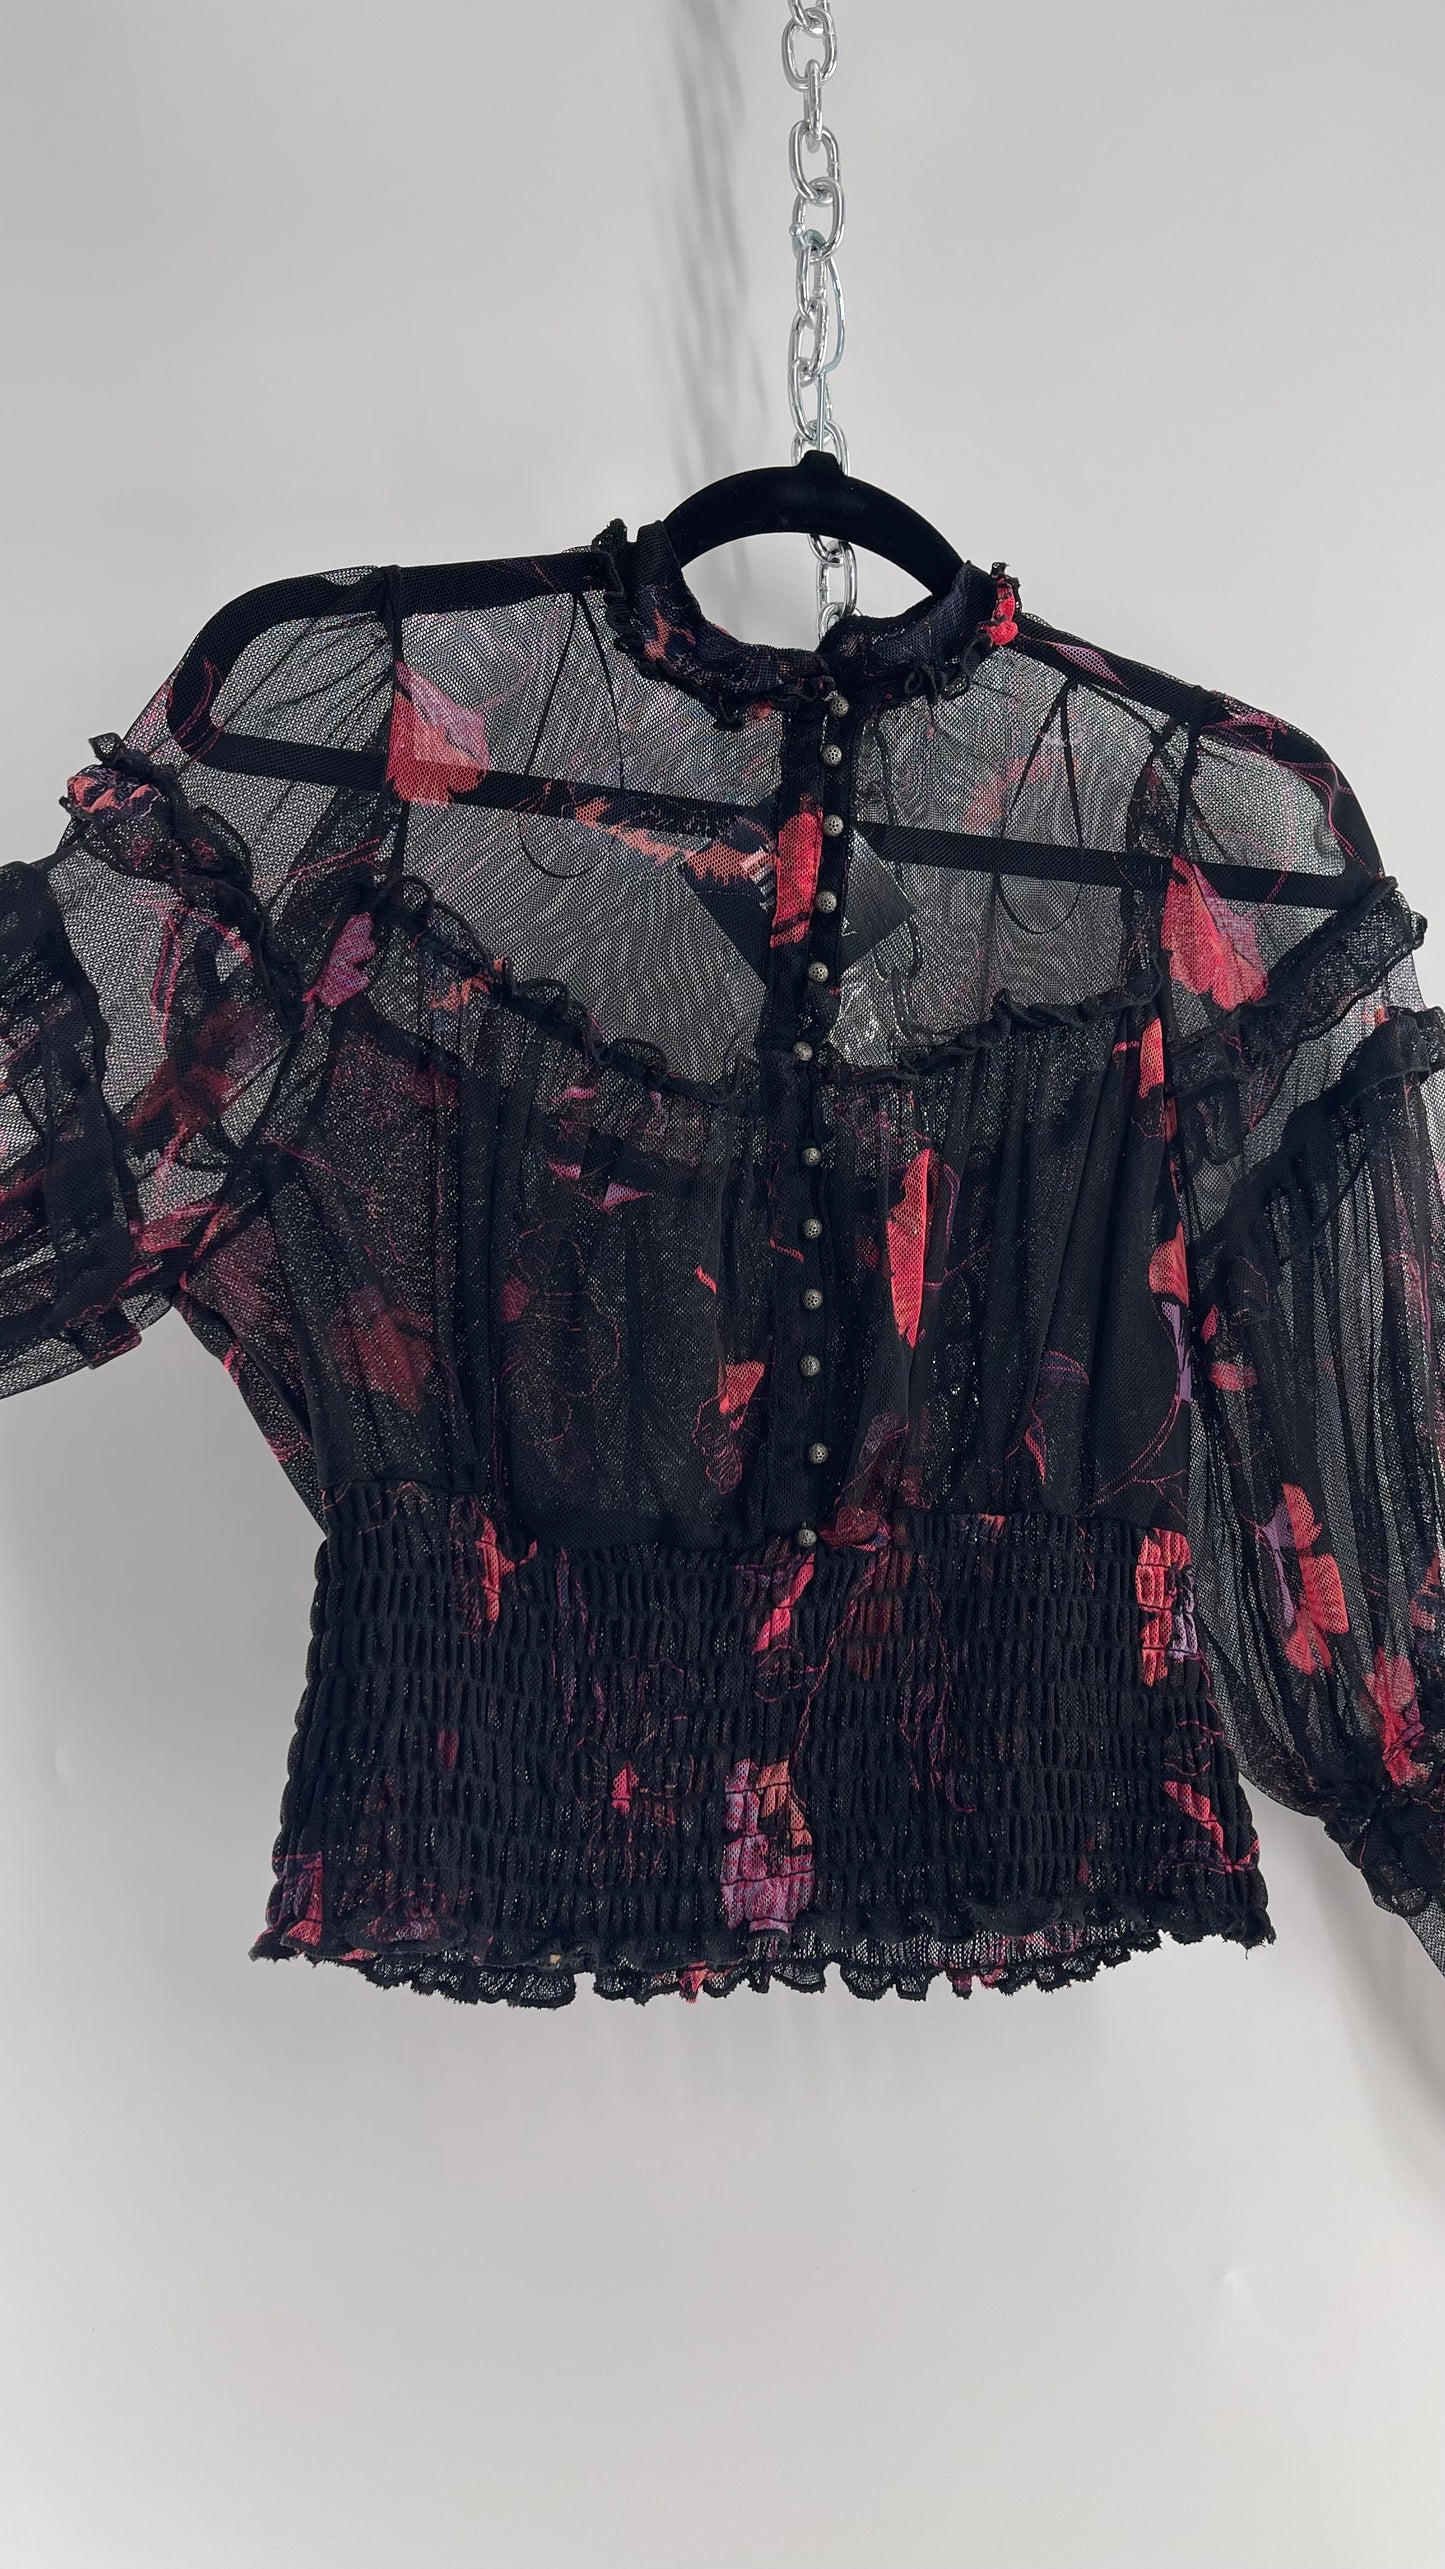 Free People Black Mesh Top with Smocked Waist, Buttoning and Contrasting Florals (Medium)